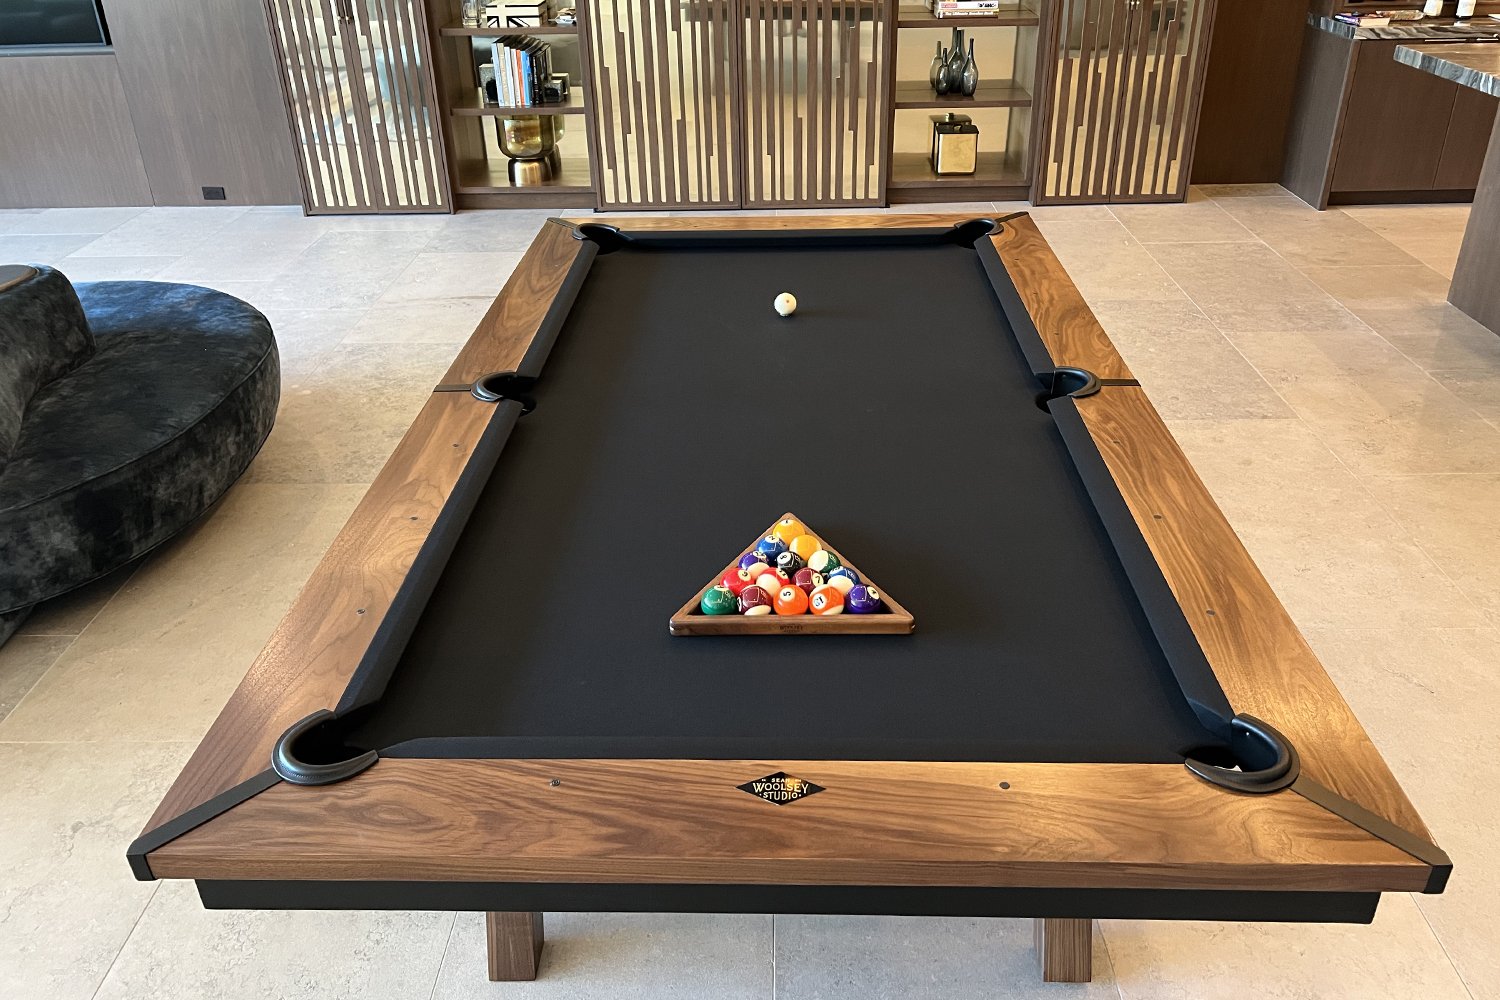 diane conklin recommends pool table pics pic